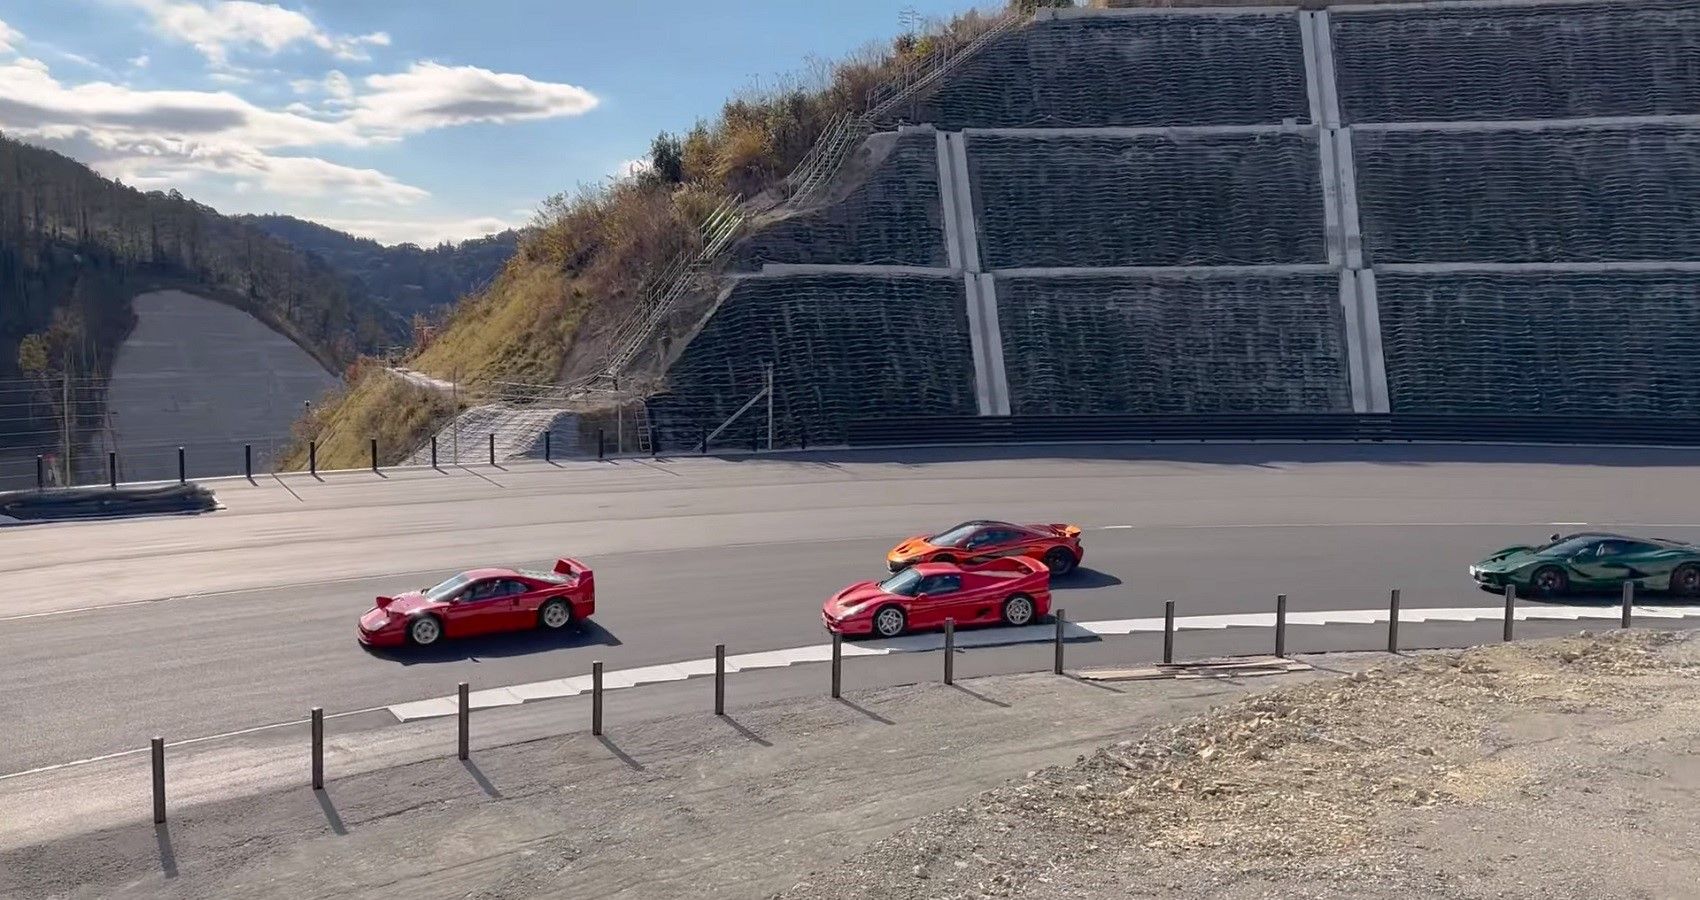 Magarigawa Race Track and supercars, shot of cars on corner of track